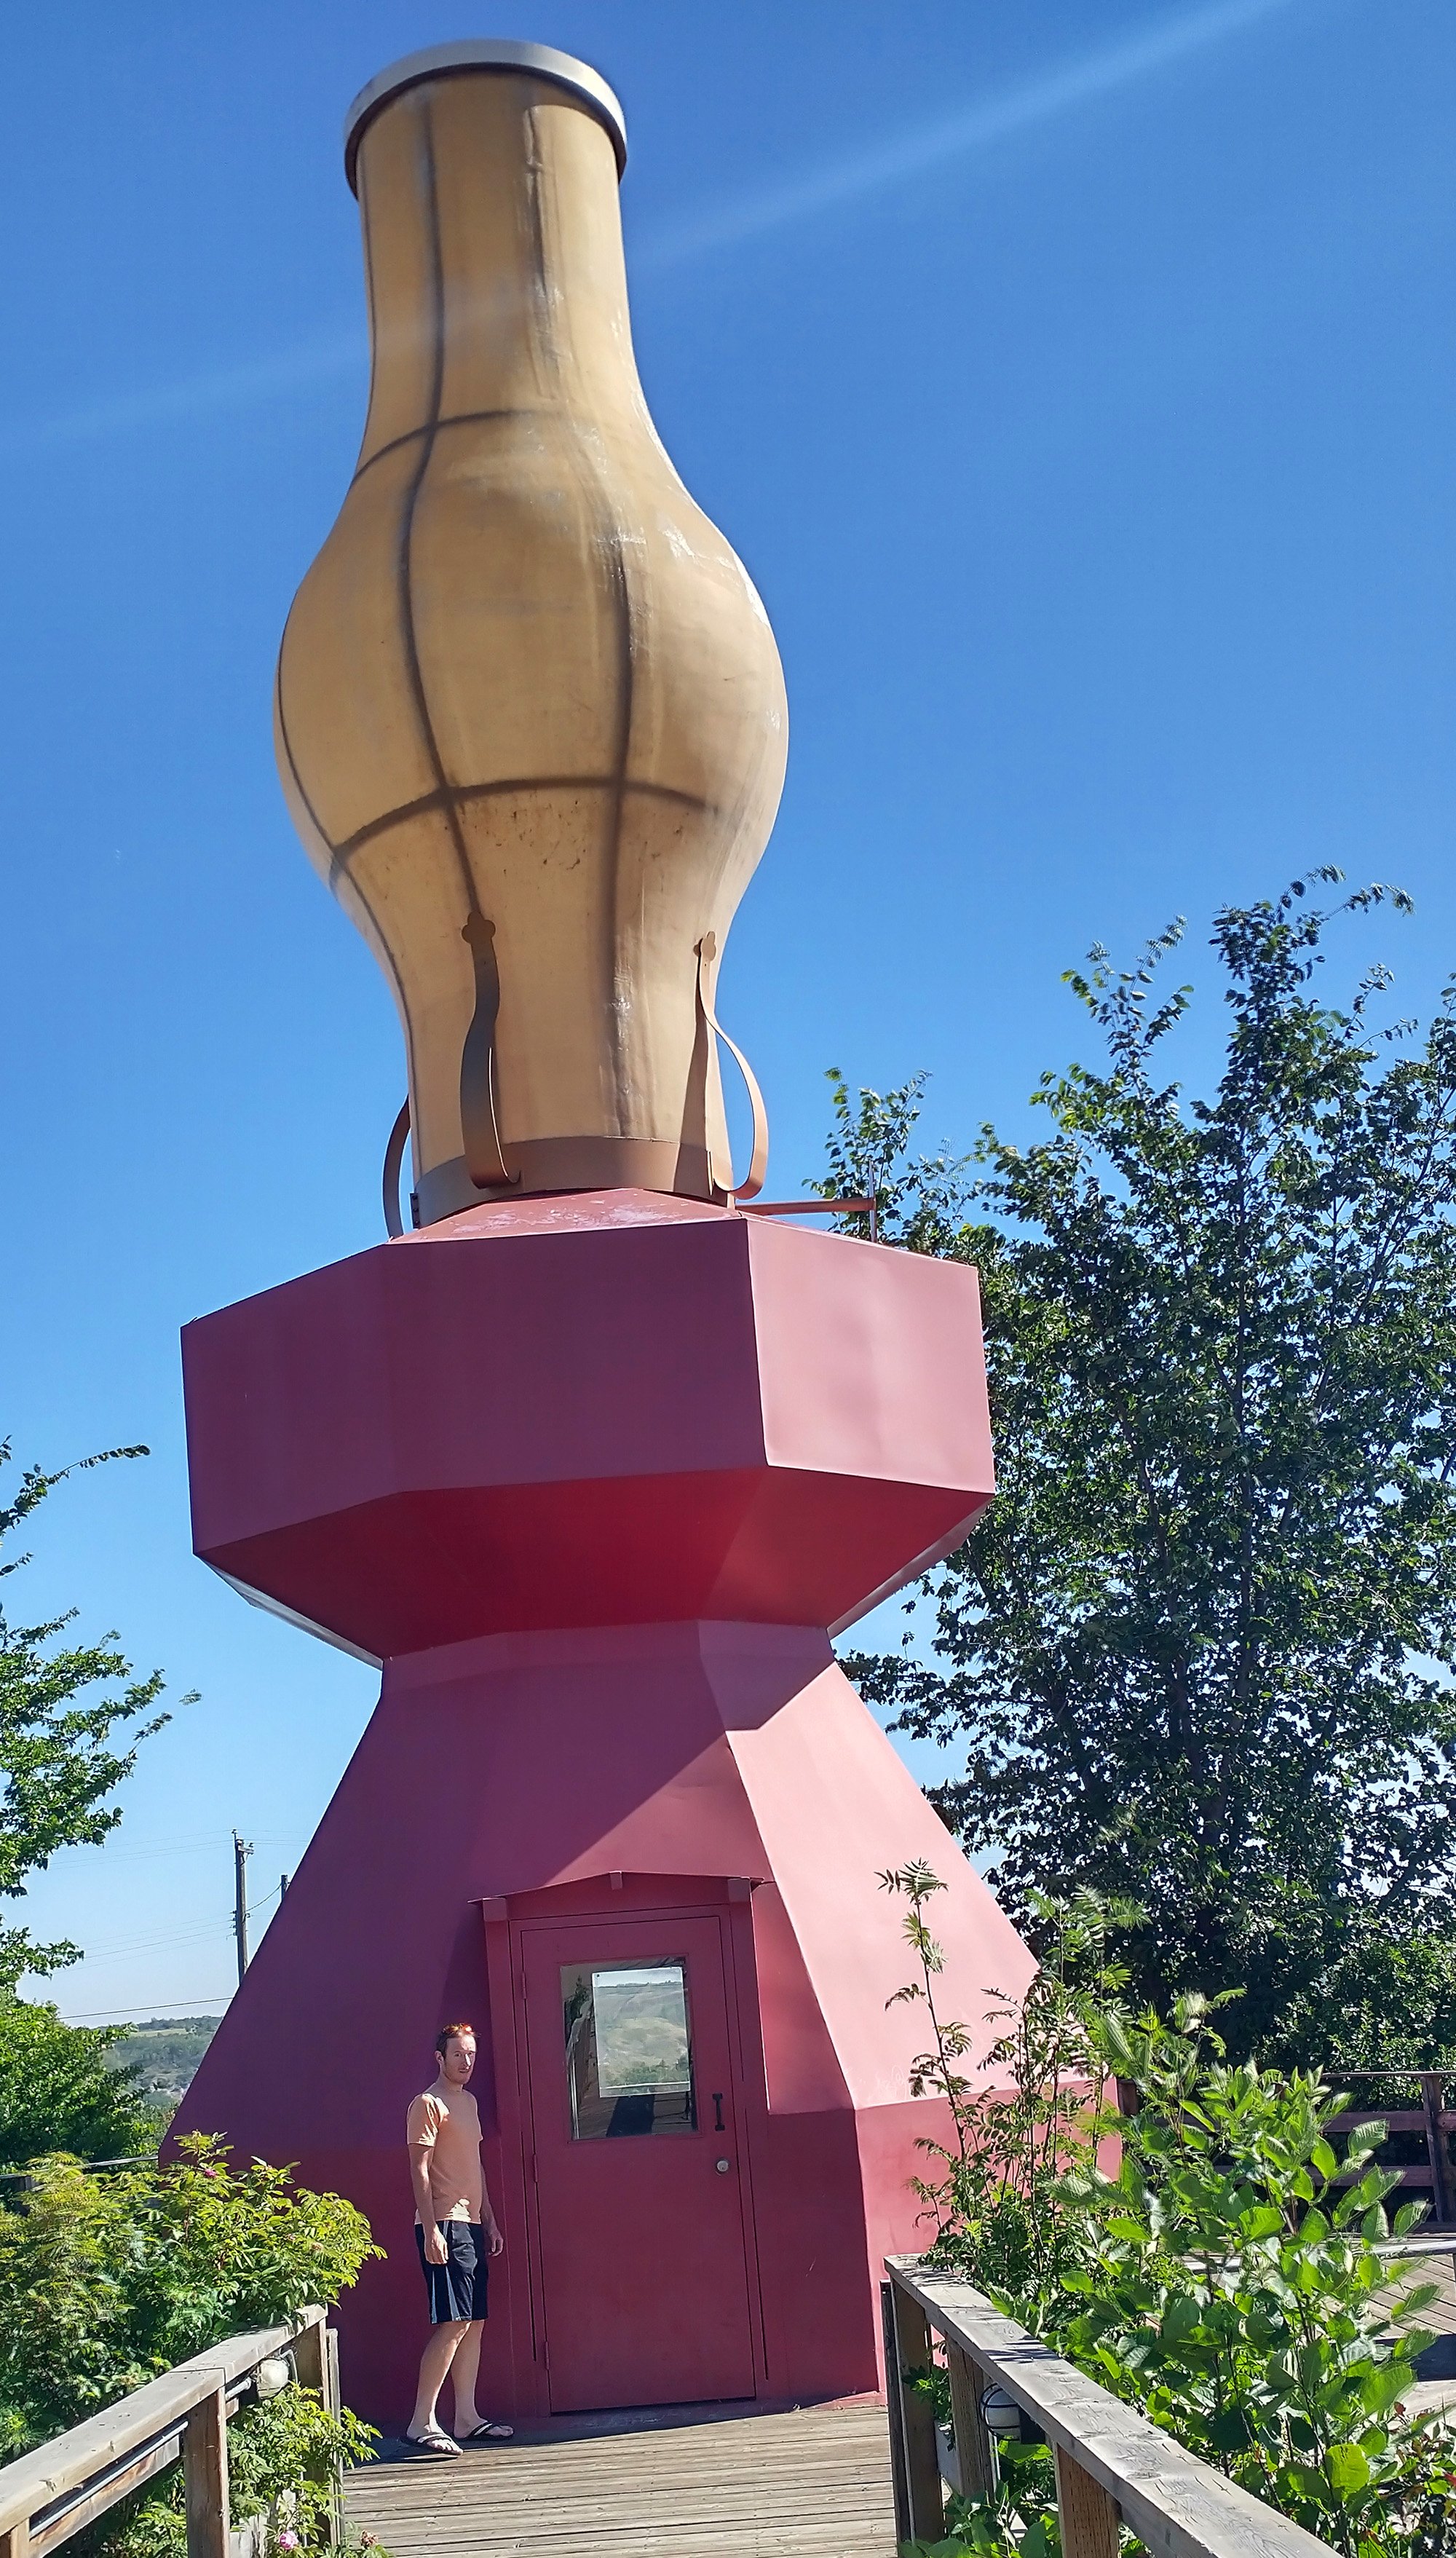 Largest Oil Lamp, in Donalda, AB! There's some Badlands scenery around there too.